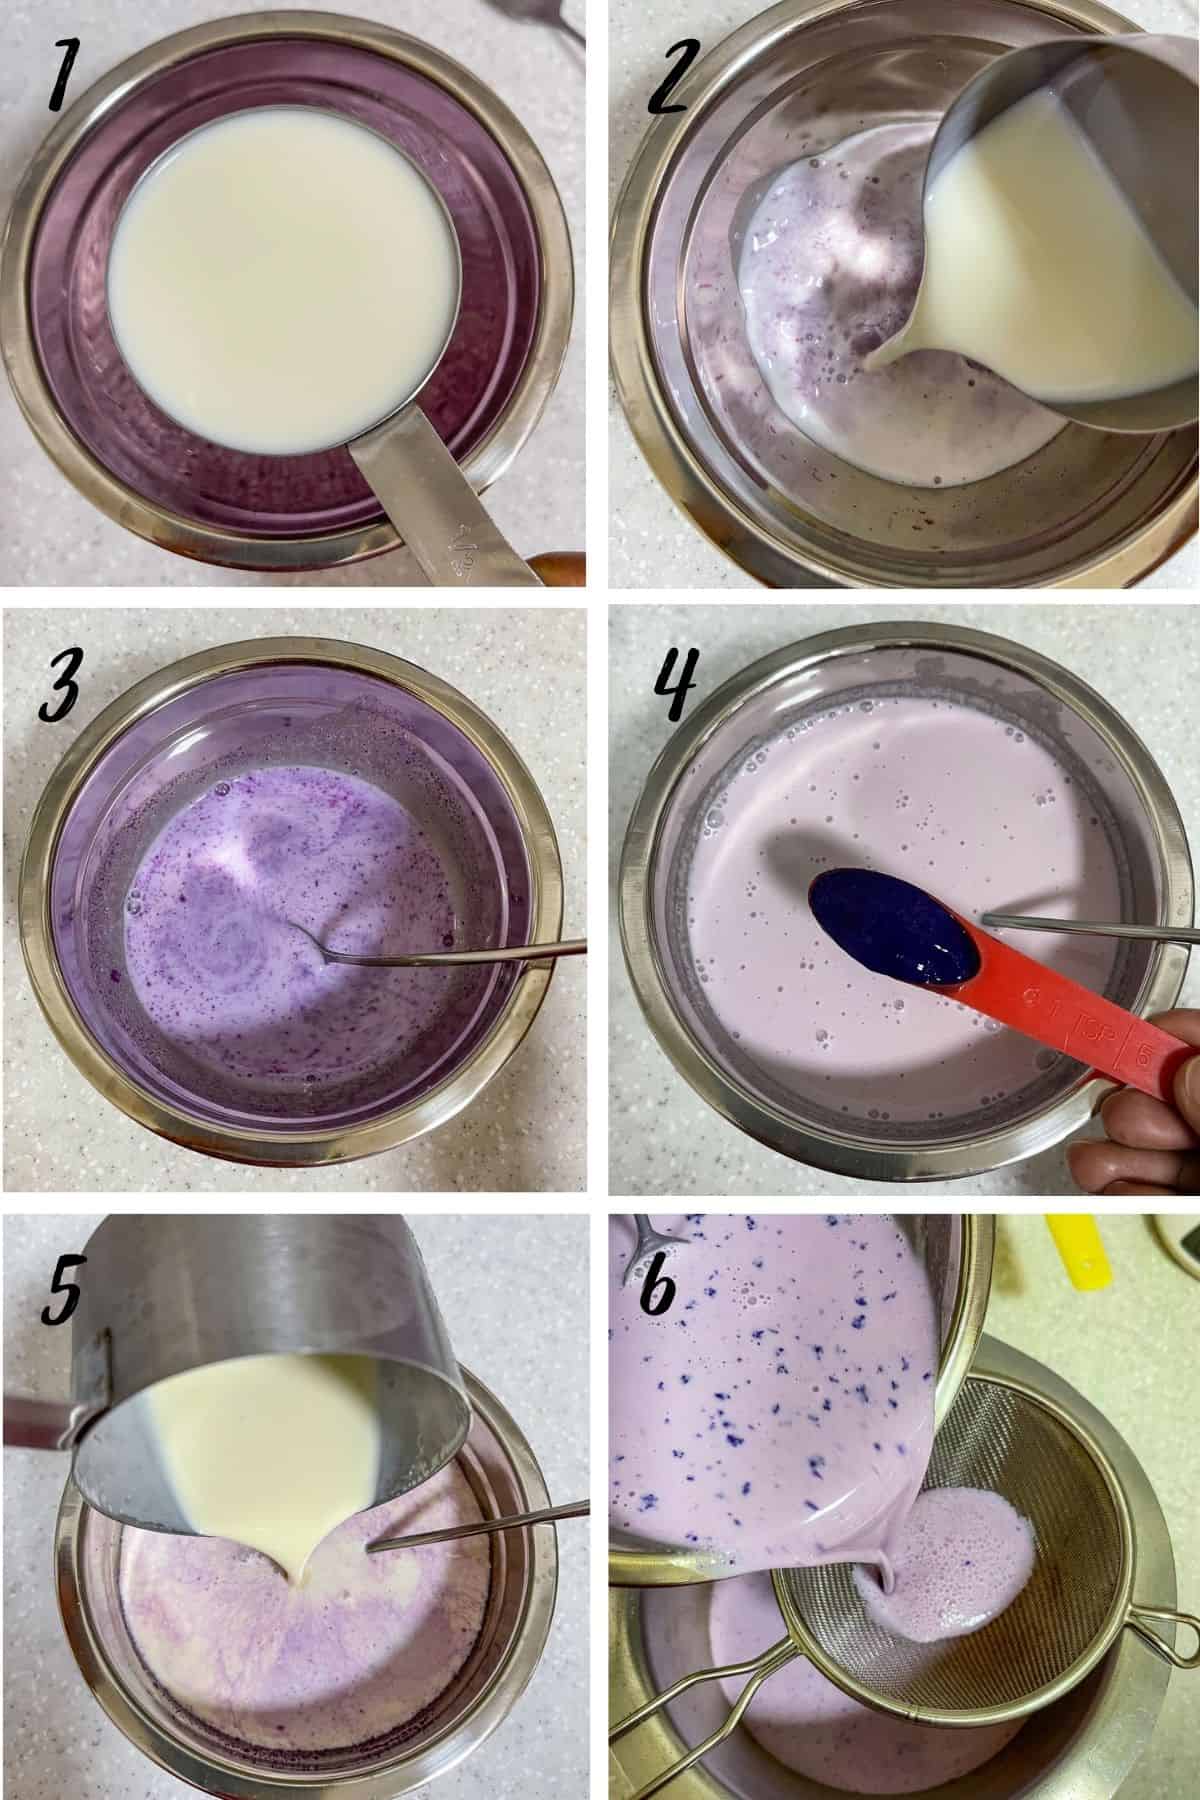 A poster of 4 images showing how to mix ube ice cream solution